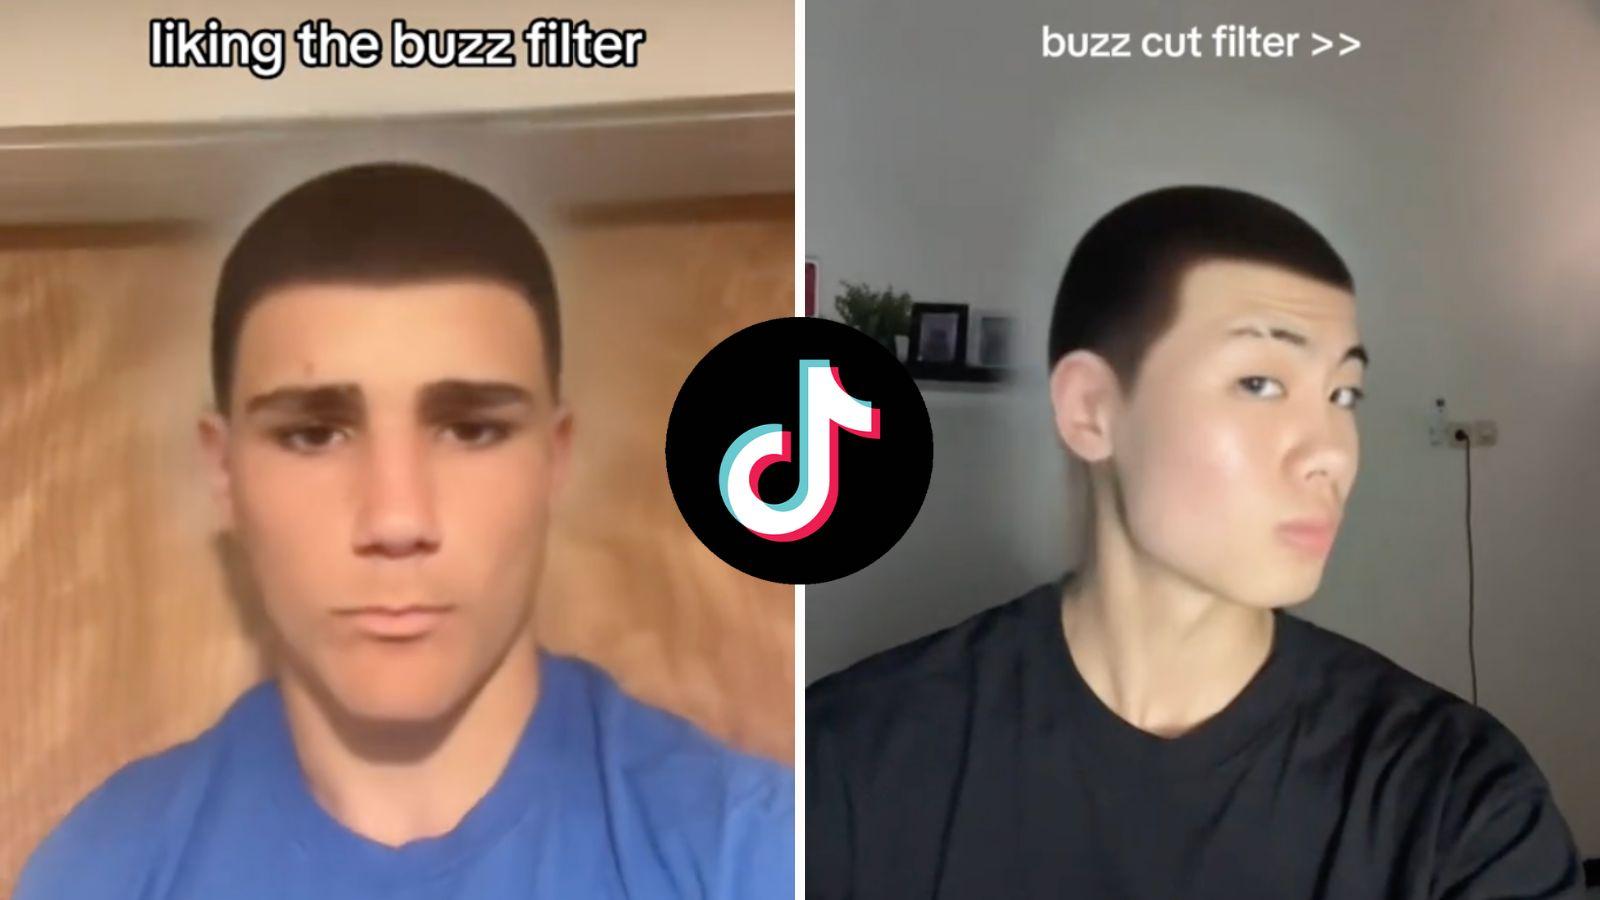 How to get the buzz cut filter on TikTok